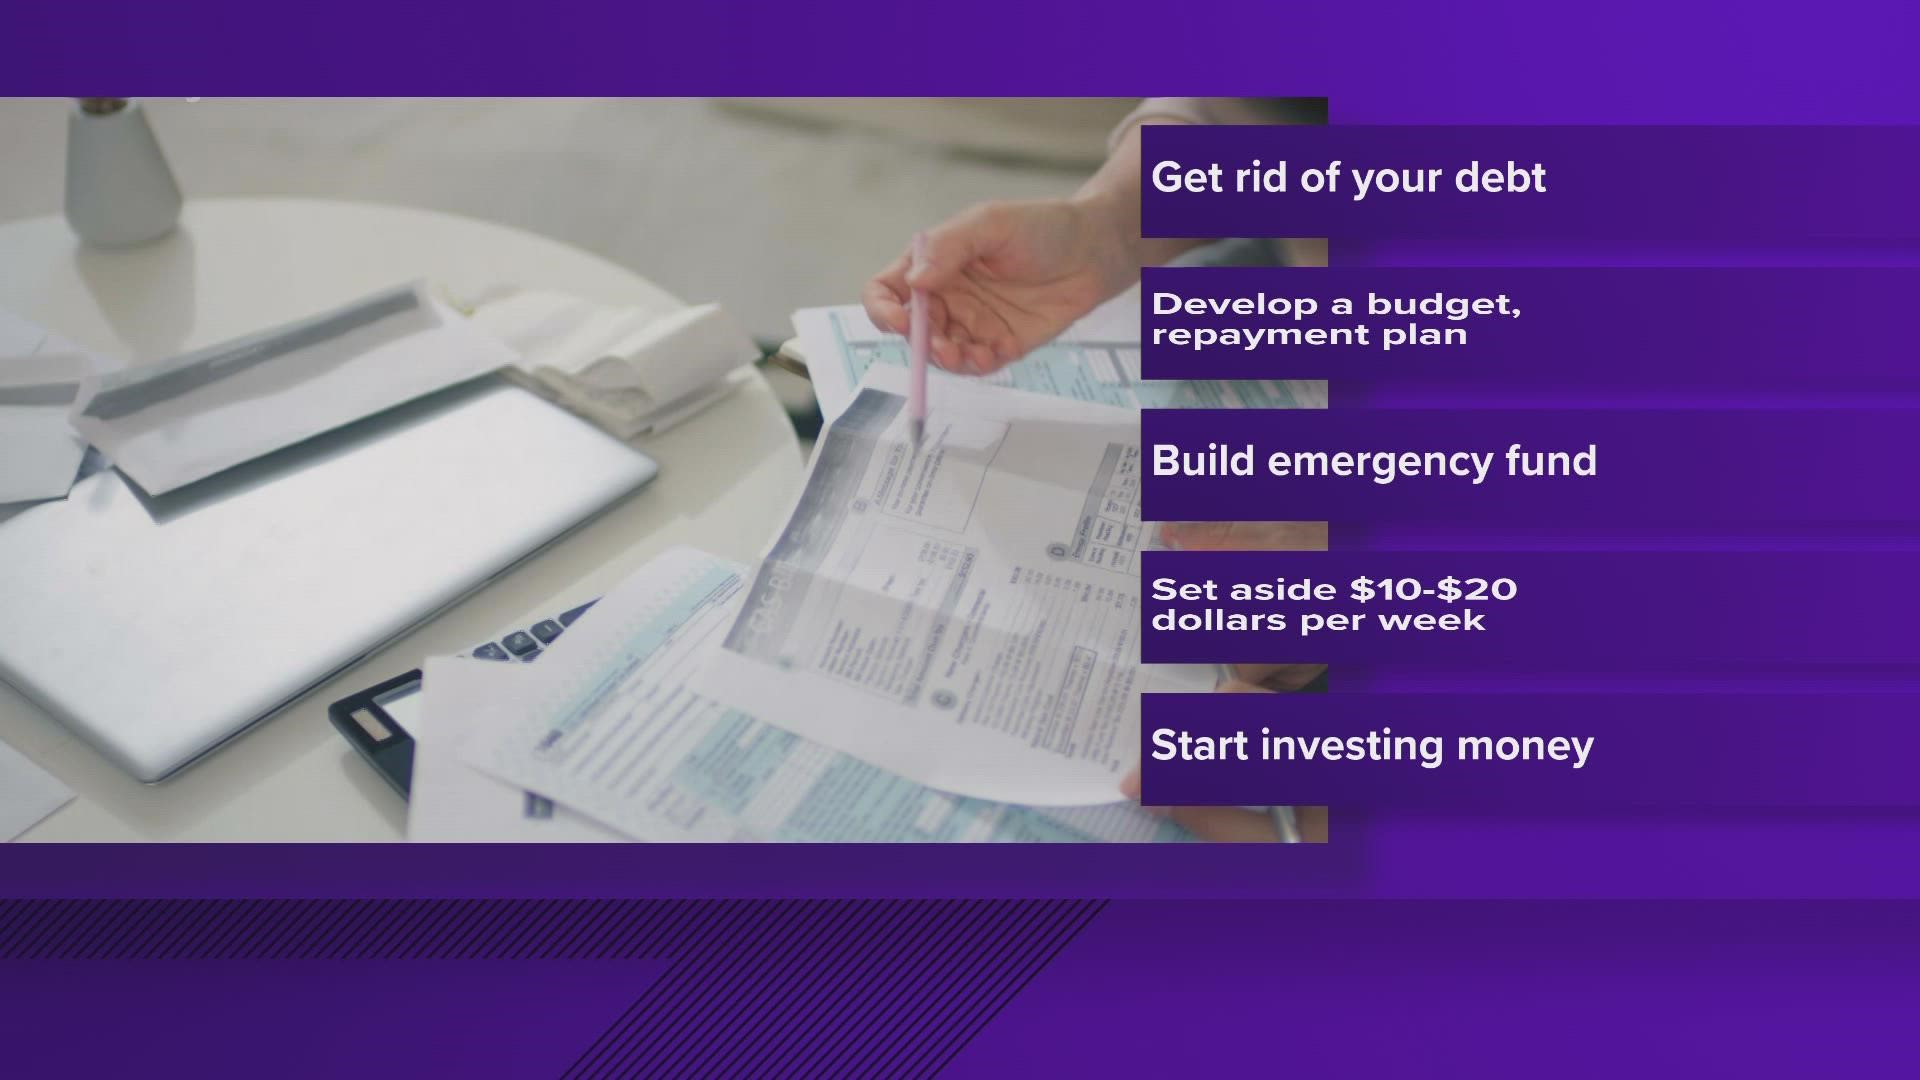 As we kick off the first week of the year, financial experts say it's the best time to start making your money count.